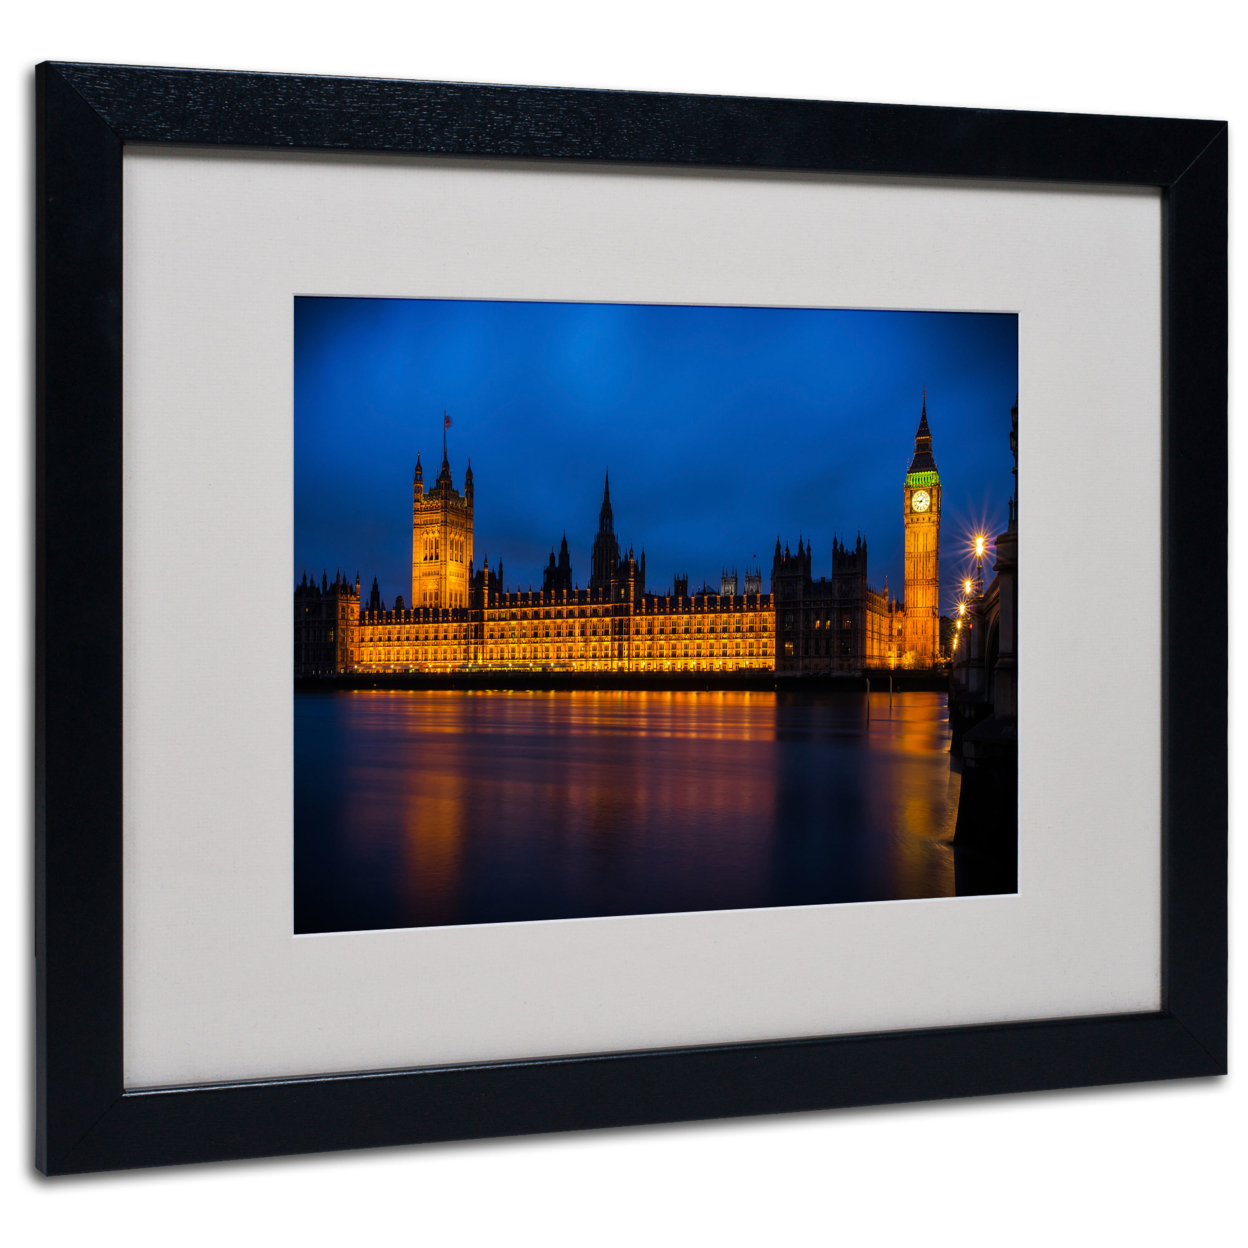 Giuseppe Torre 'The Classic' Black Wooden Framed Art 18 X 22 Inches